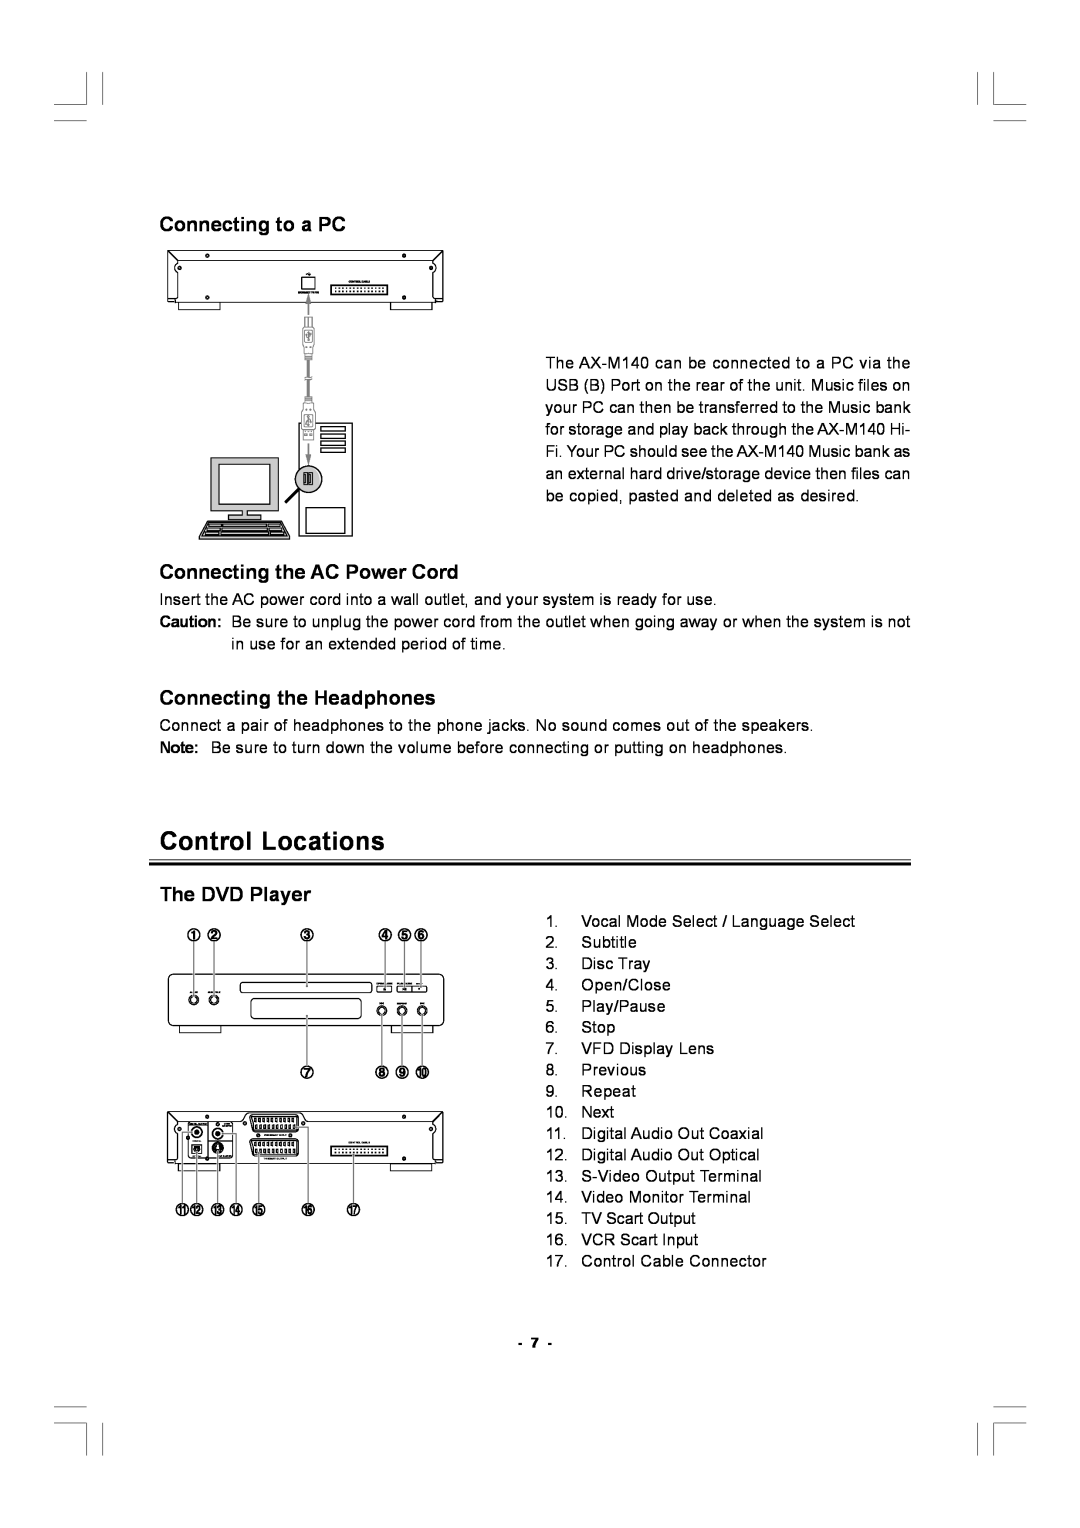 Hitachi AX-M140 manual Control Locations, Connecting to a PC, Connecting the AC Power Cord, Connecting the Headphones 